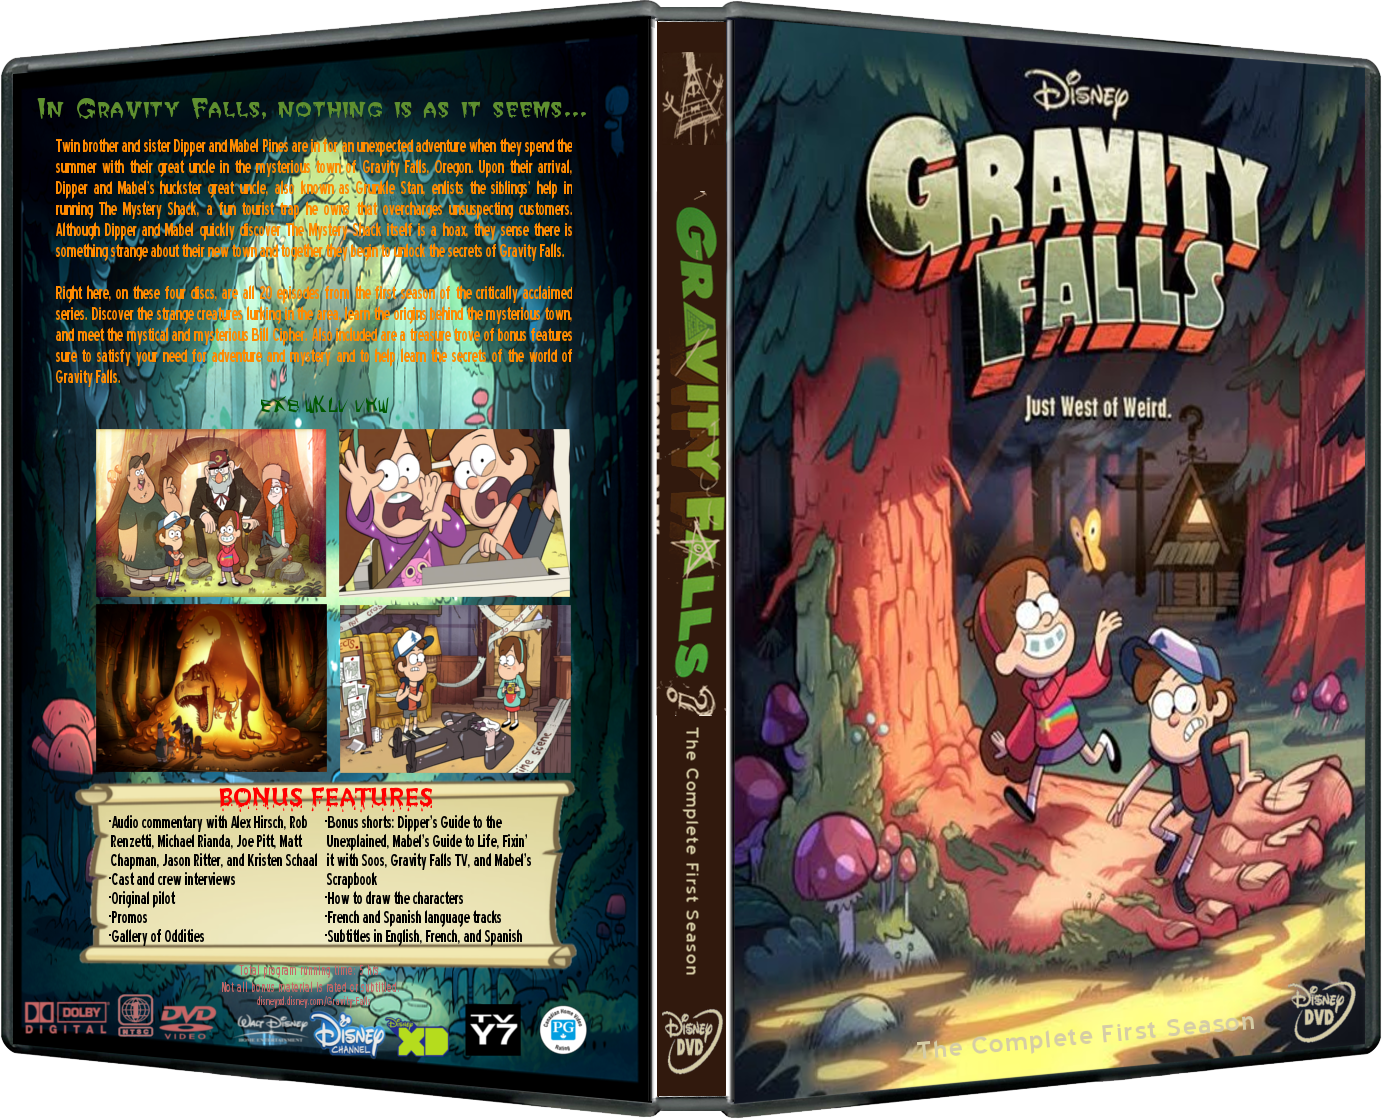 Gravity Falls: The Complete First Season box cover